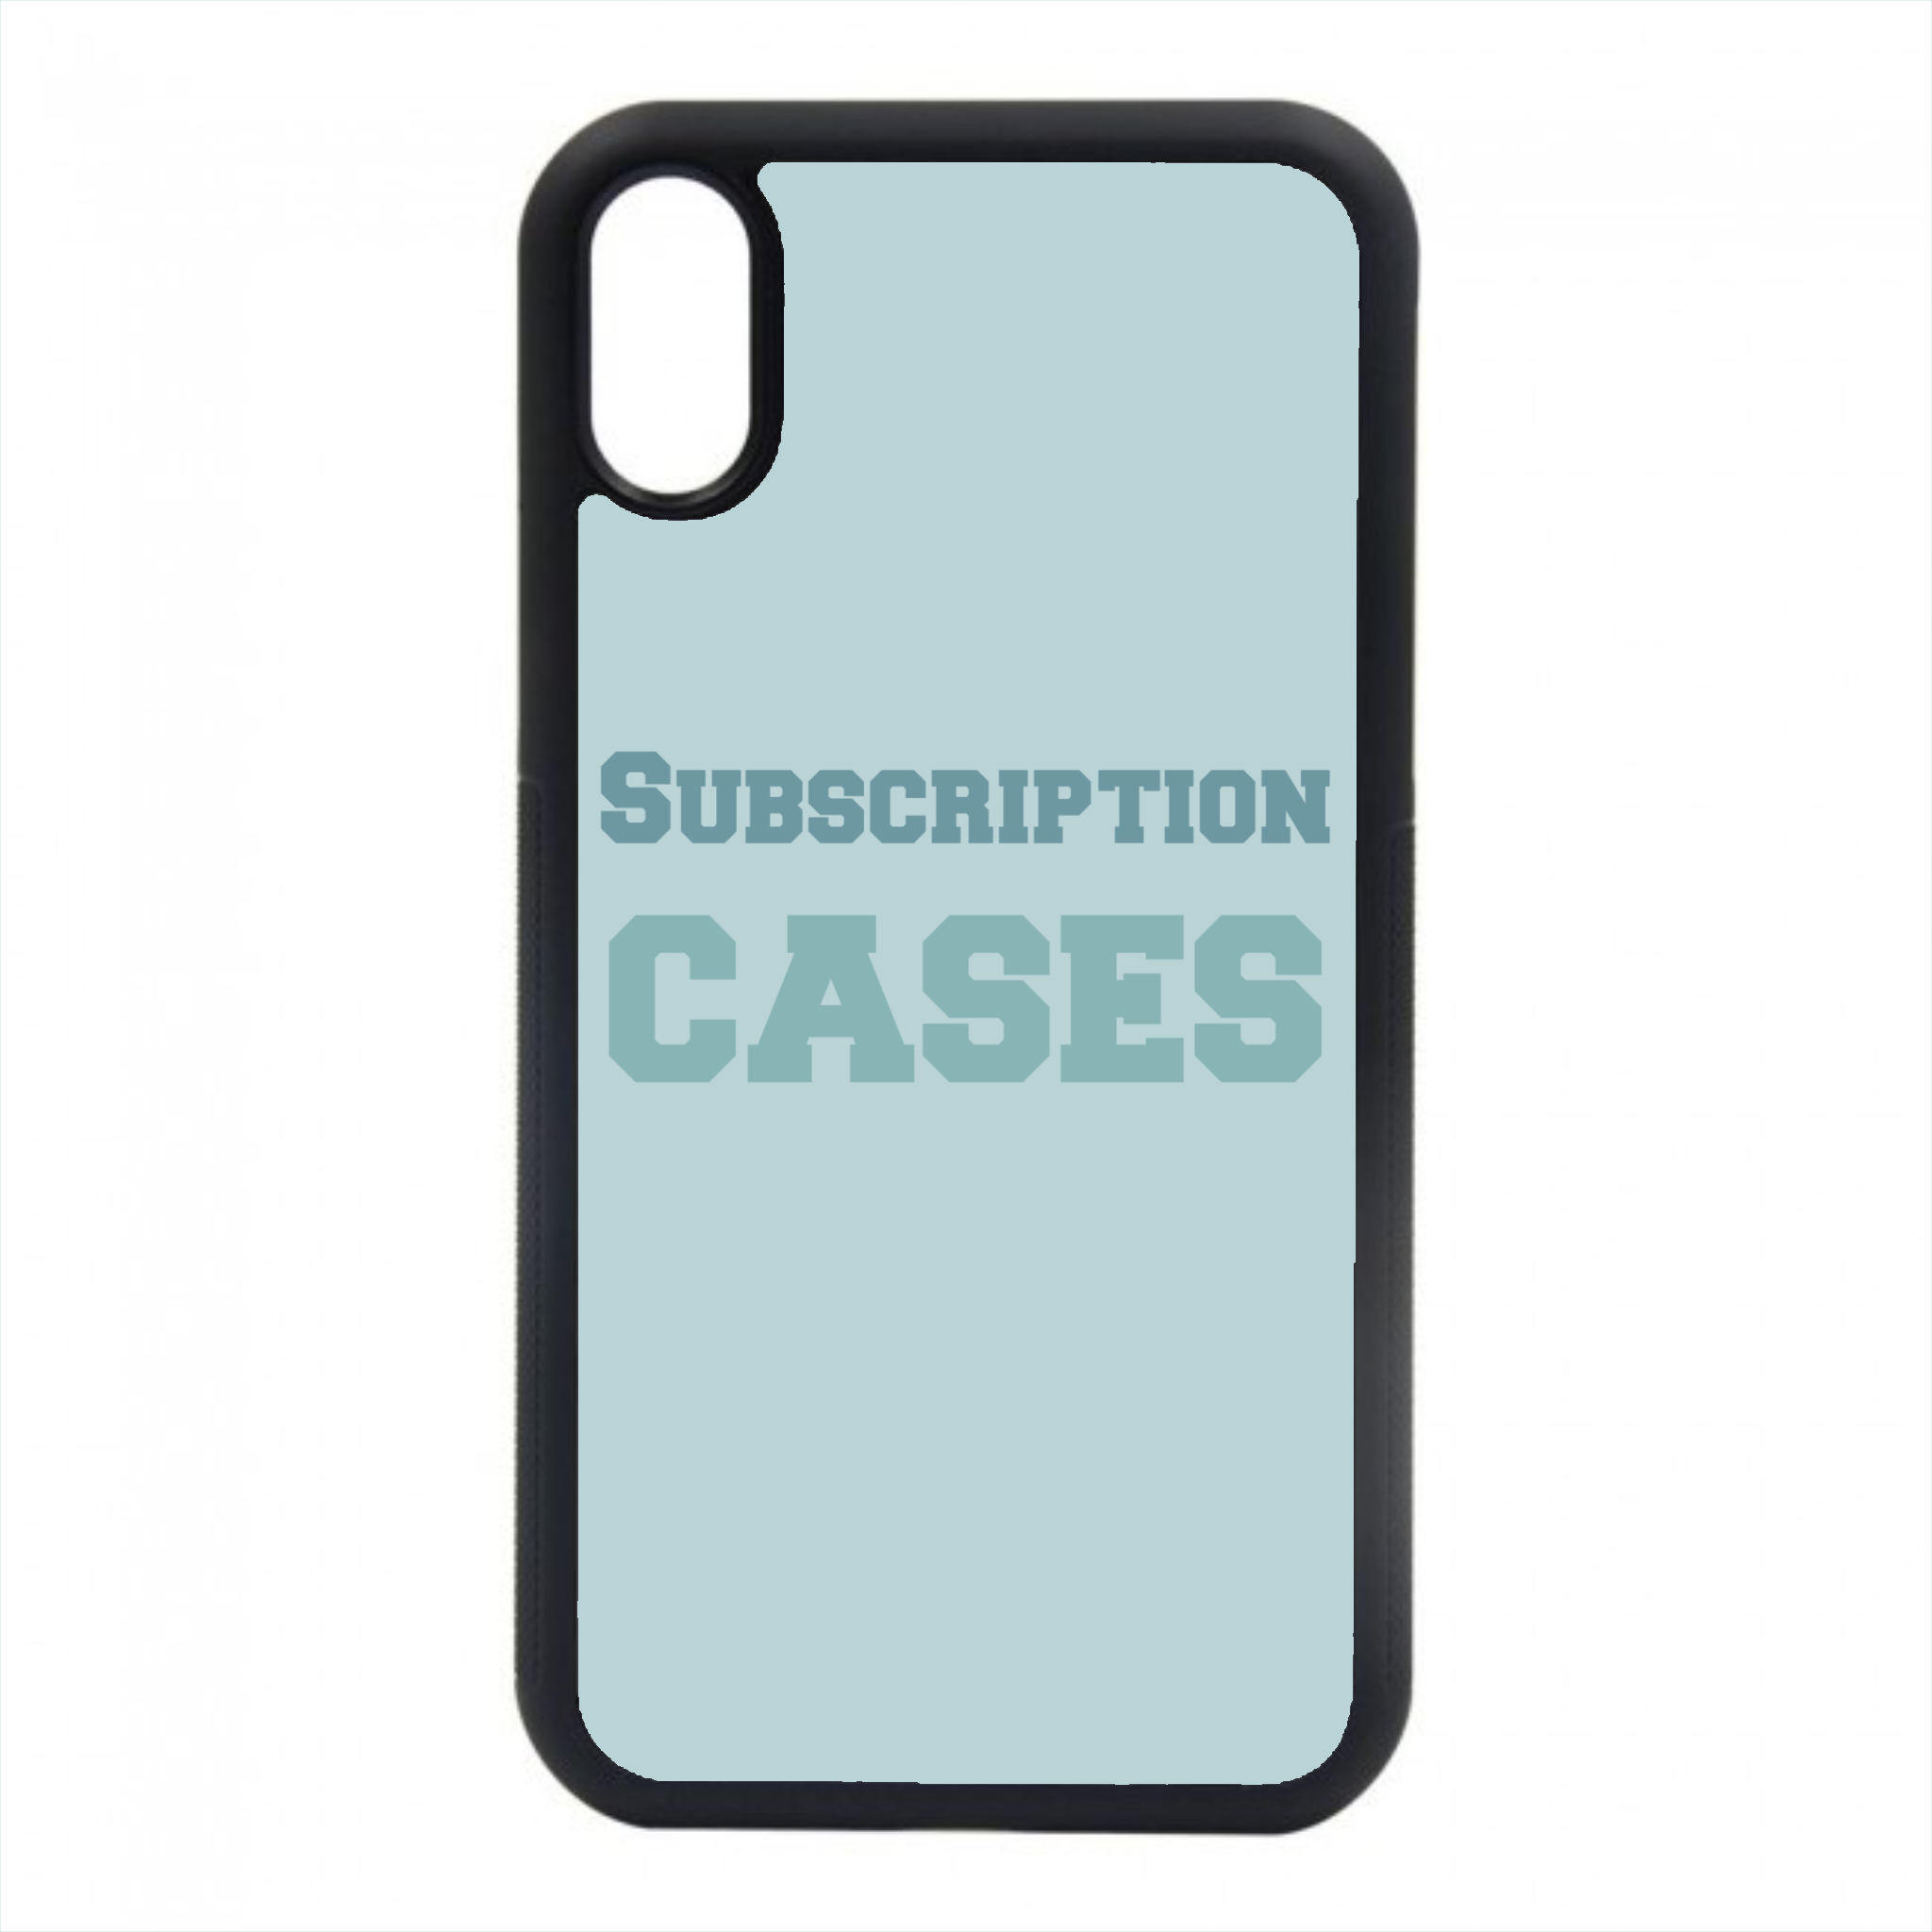 Subscription Cases - FREE SHIPPING!